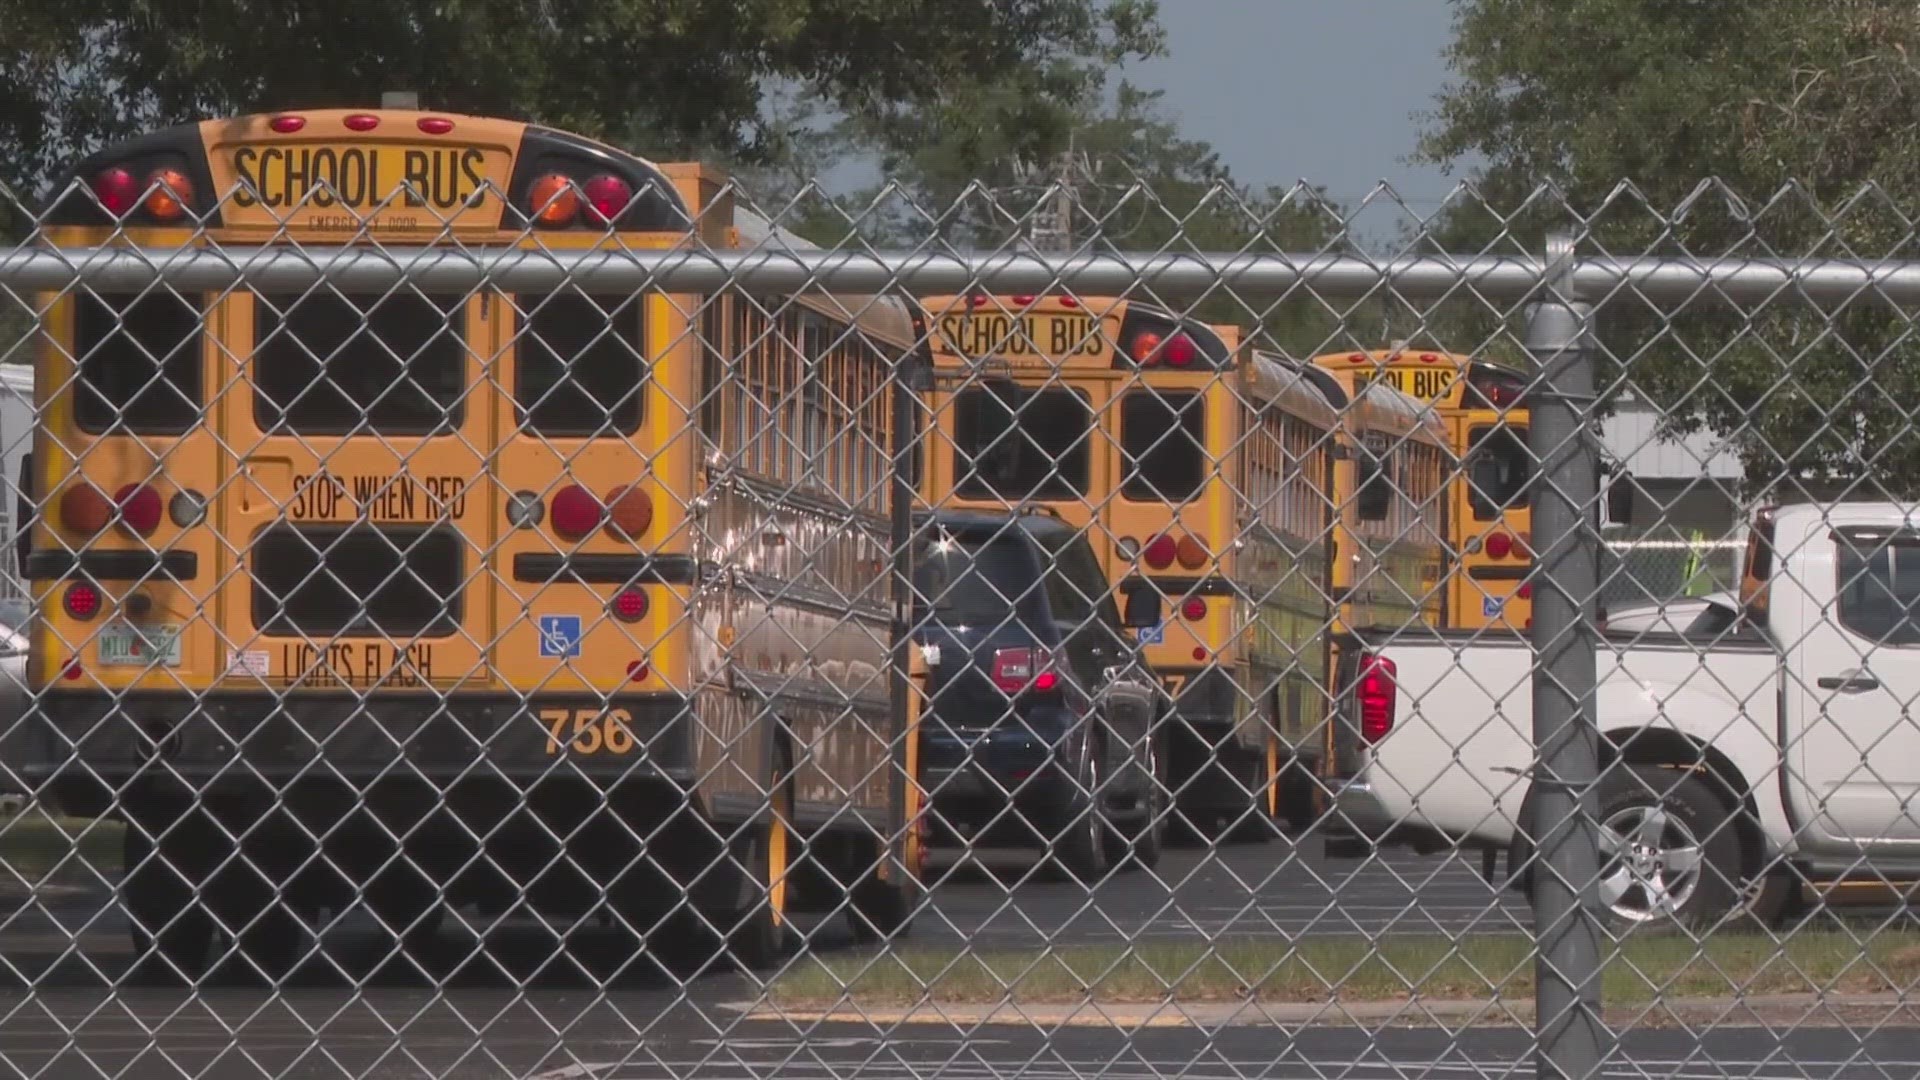 DCPS says parents should expect widespread delays due to "abnormally high" number of bus driver absences.